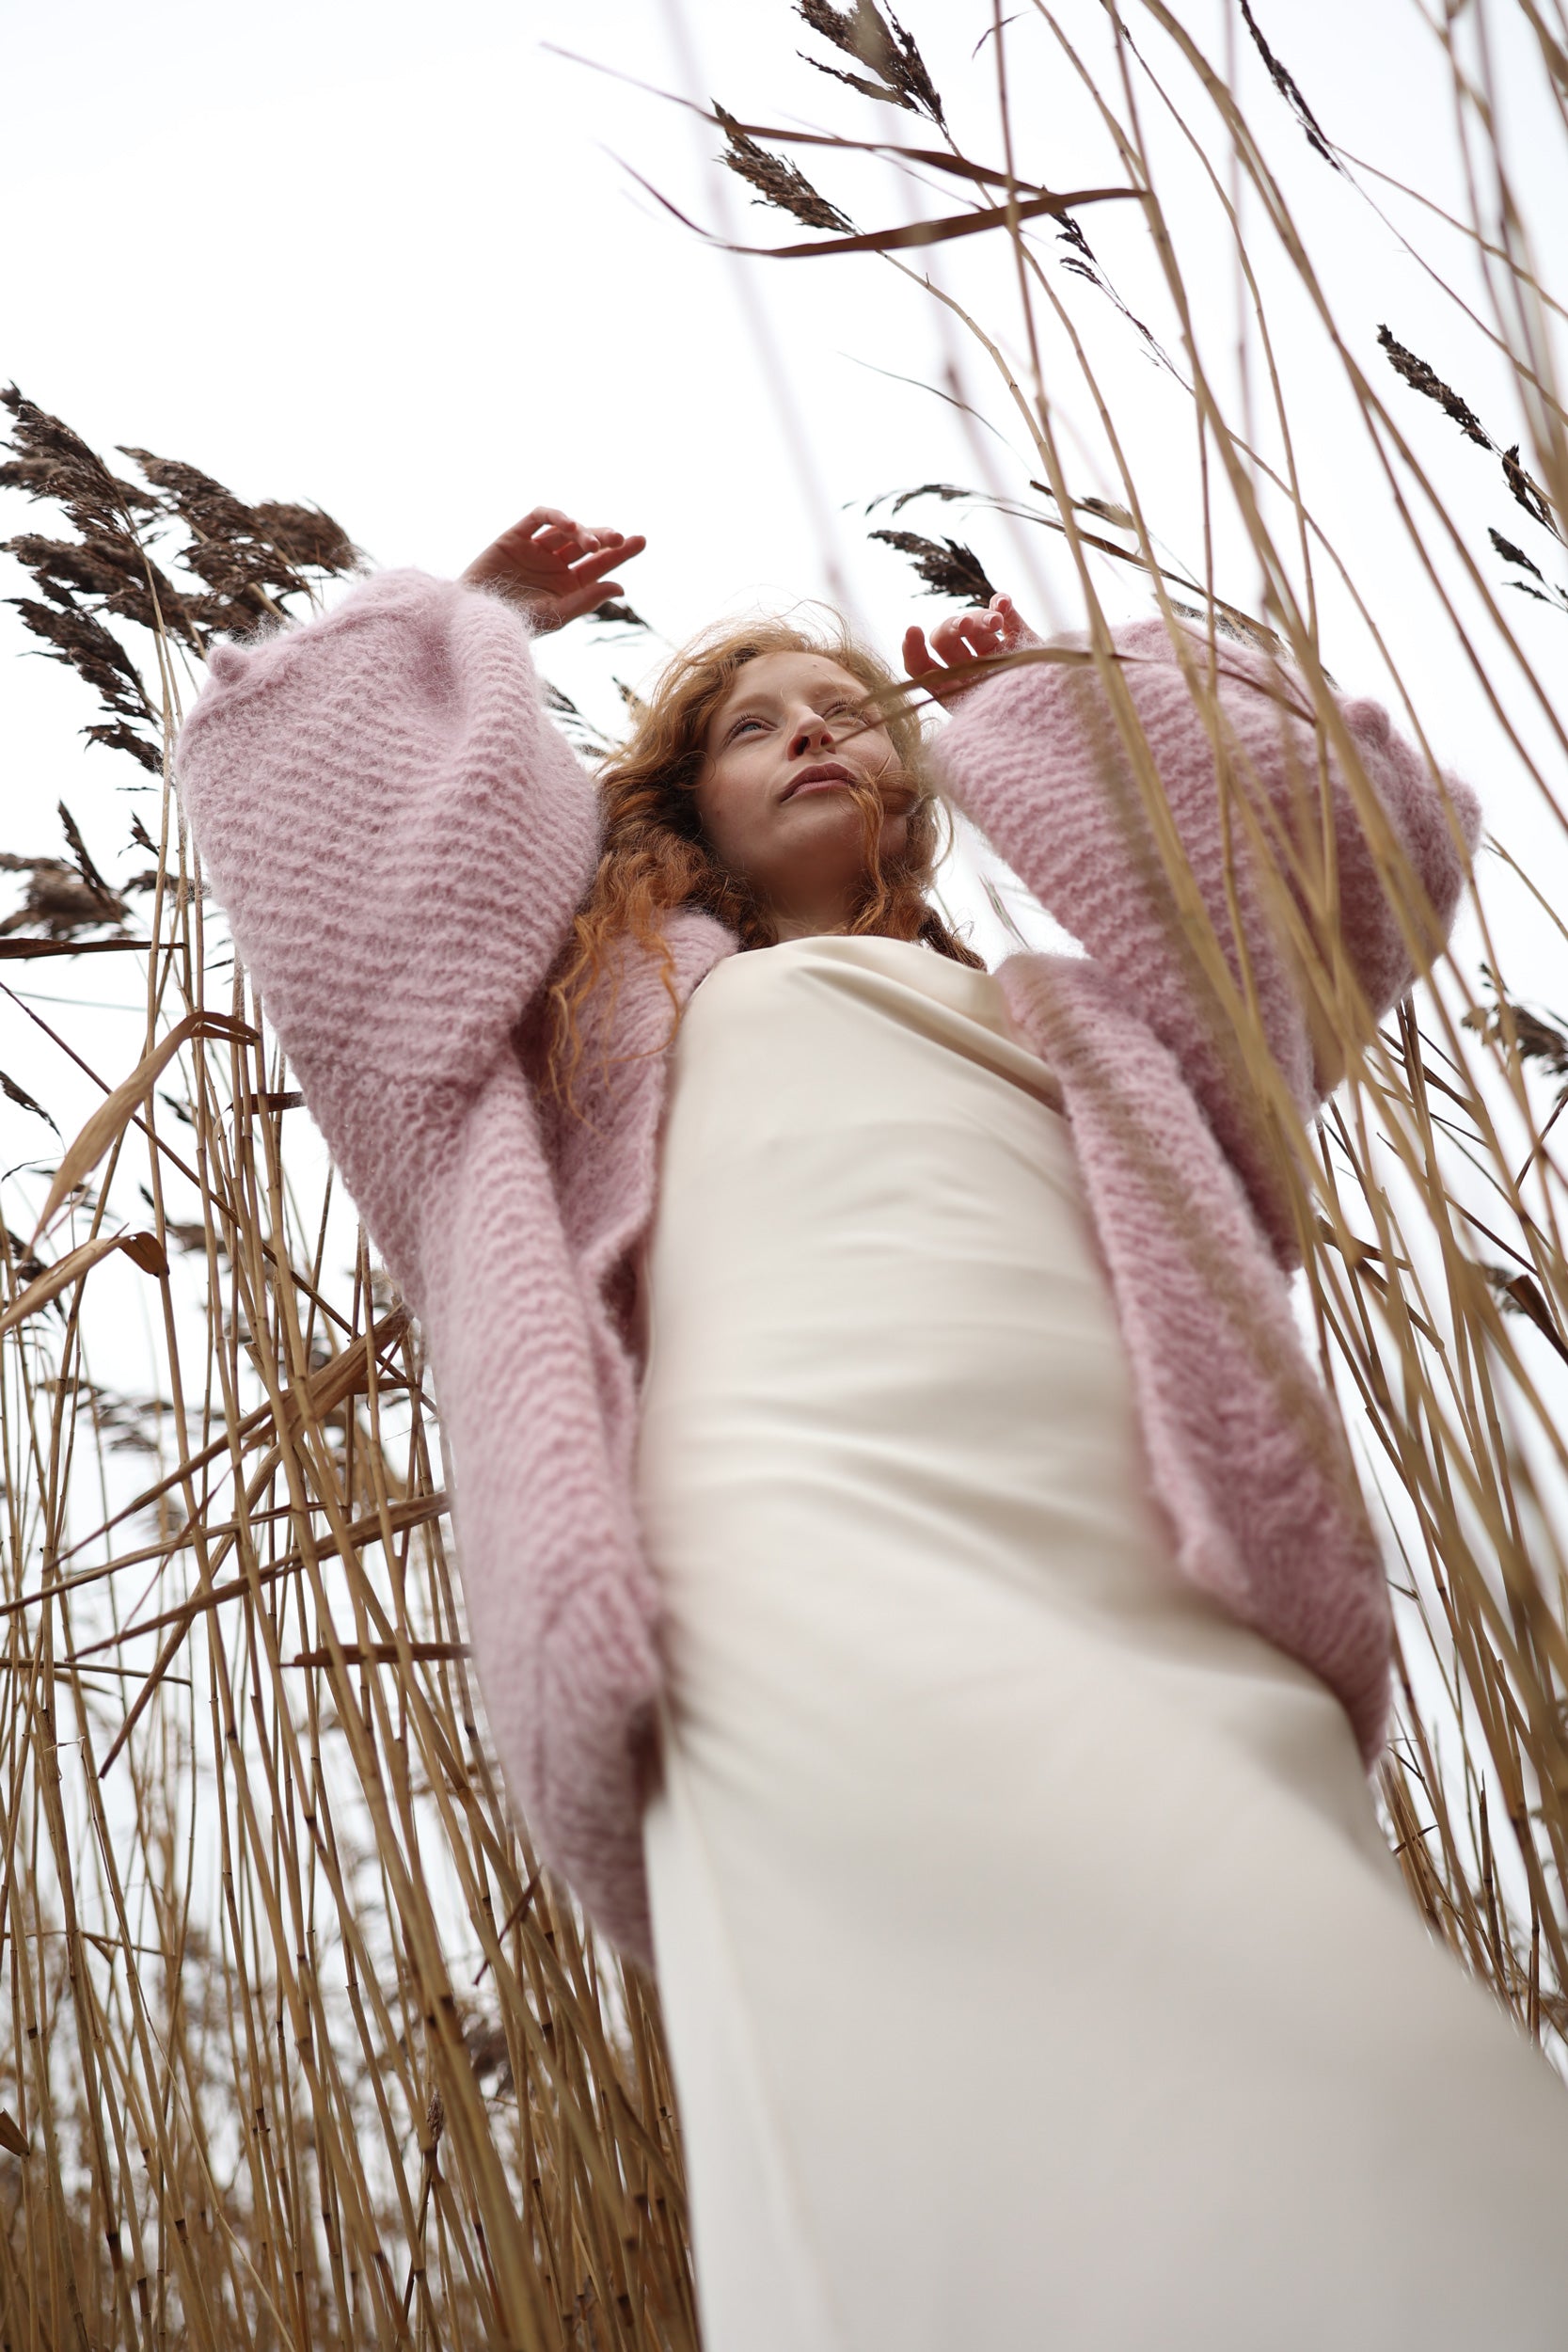 Naturally luxurious hand knit fluffy pink cardigan honouring Irish heritage from BAWN 